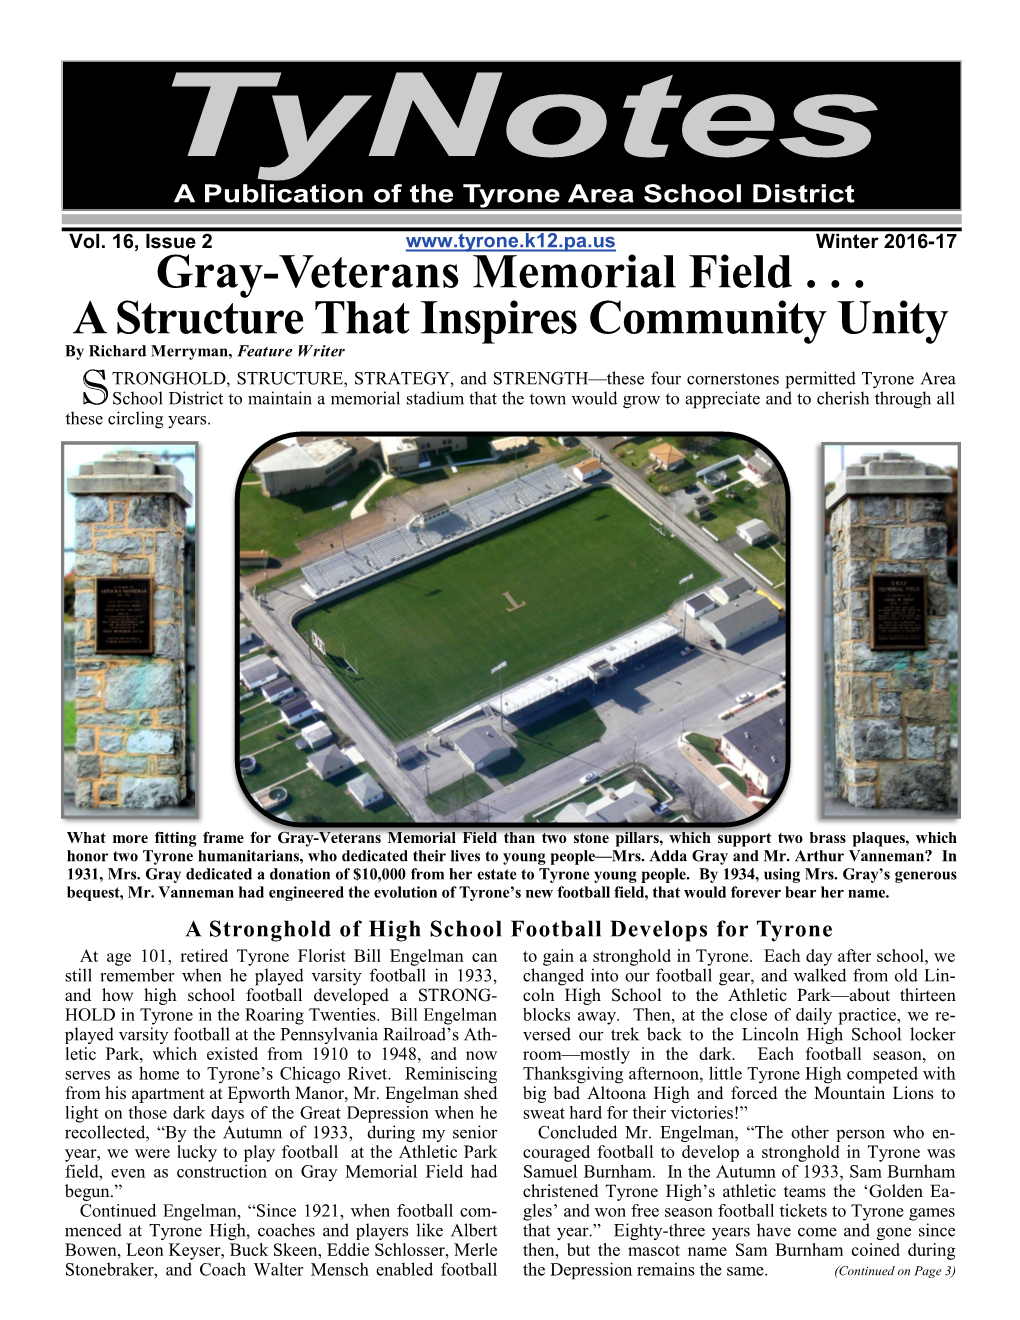 Gray-Veterans Memorial Field . . . a Structure That Inspires Community